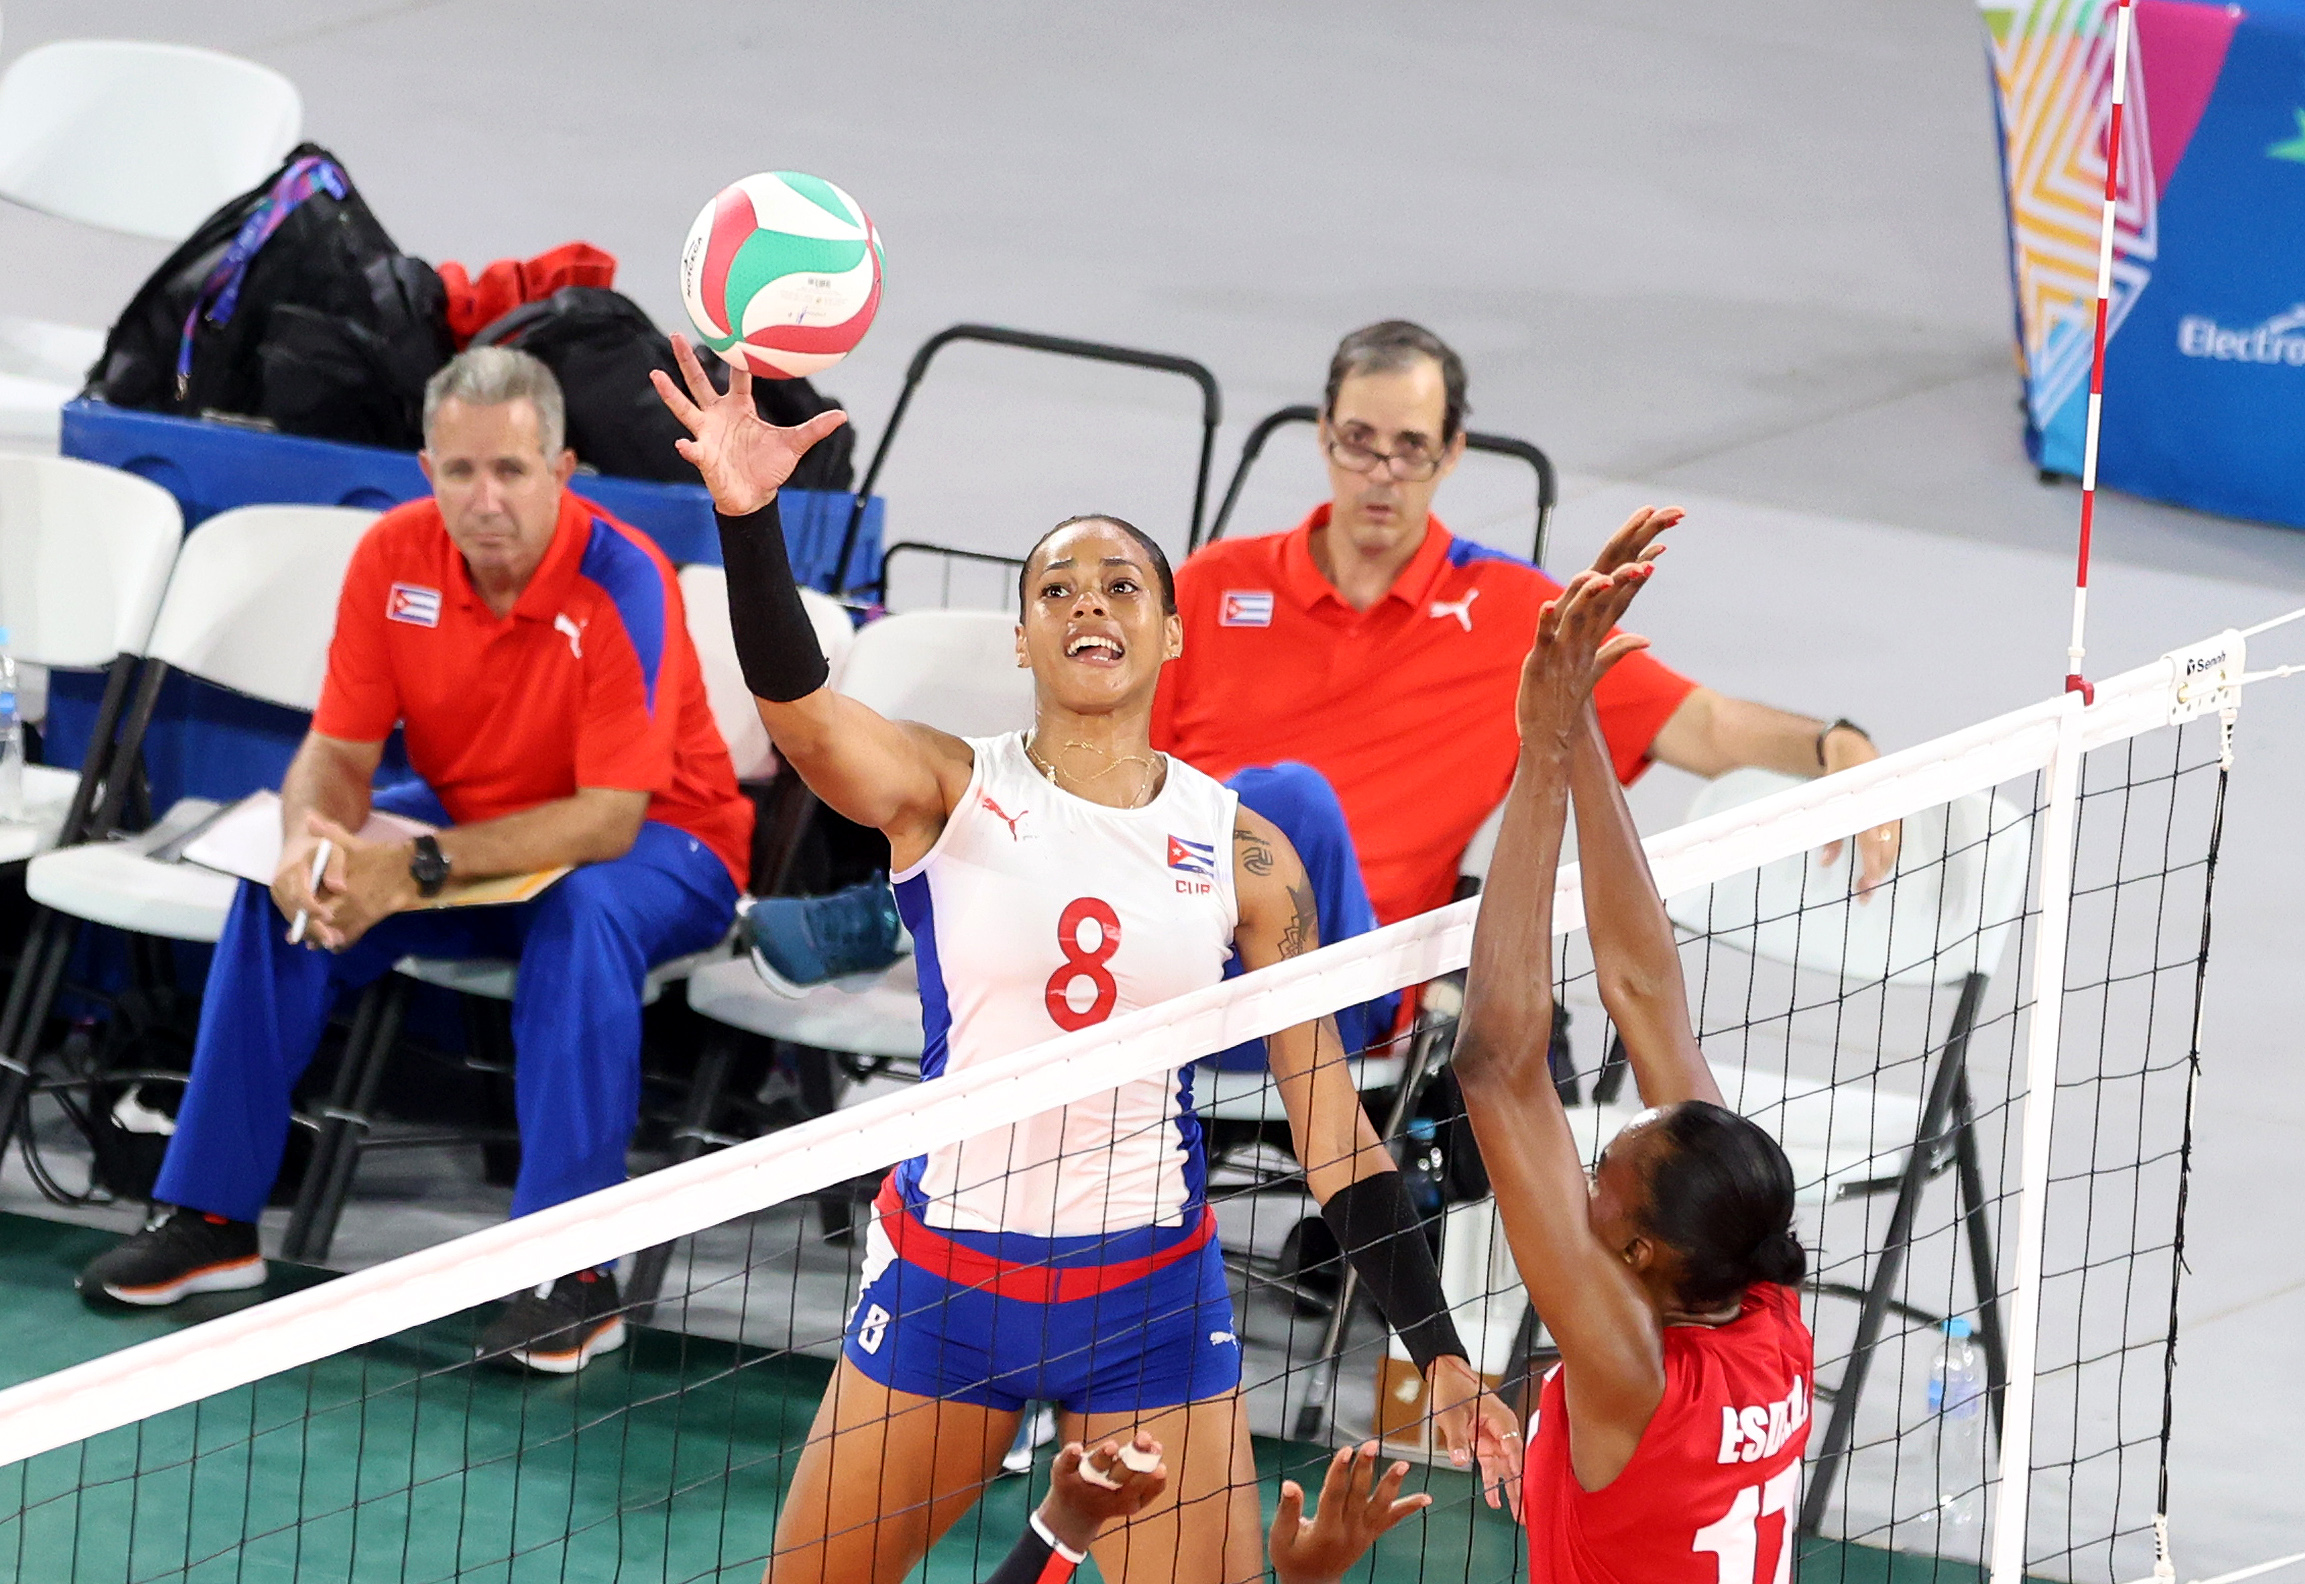 Cuba beats Trinidad & Tobago in straight sets to improve their record 2-1 in Pool B